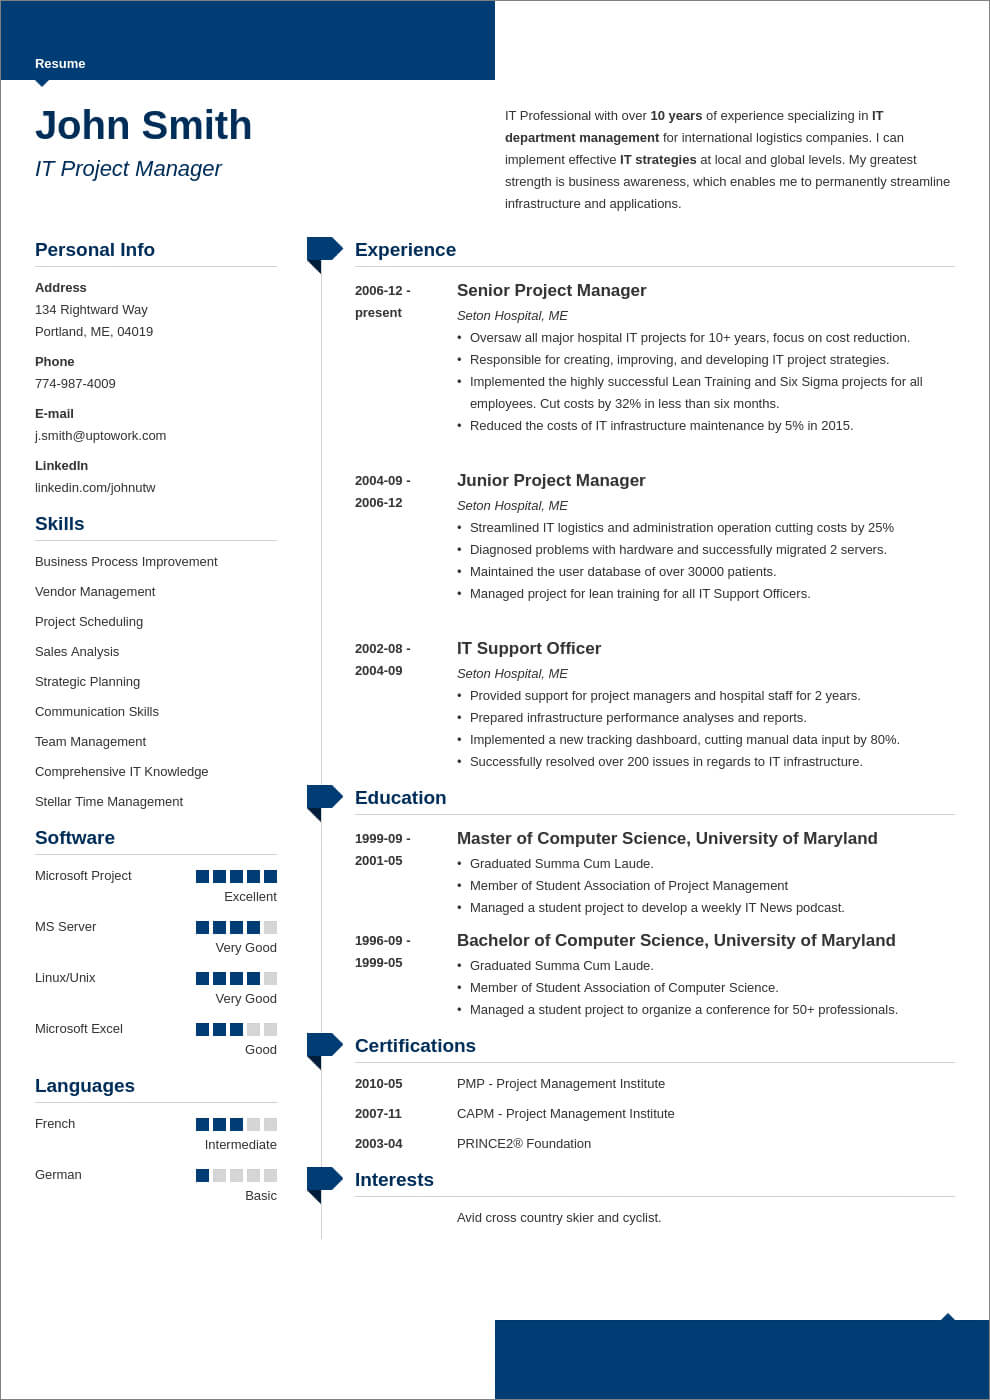 How to Make an ATS Resume (Template, Examples & Guide)